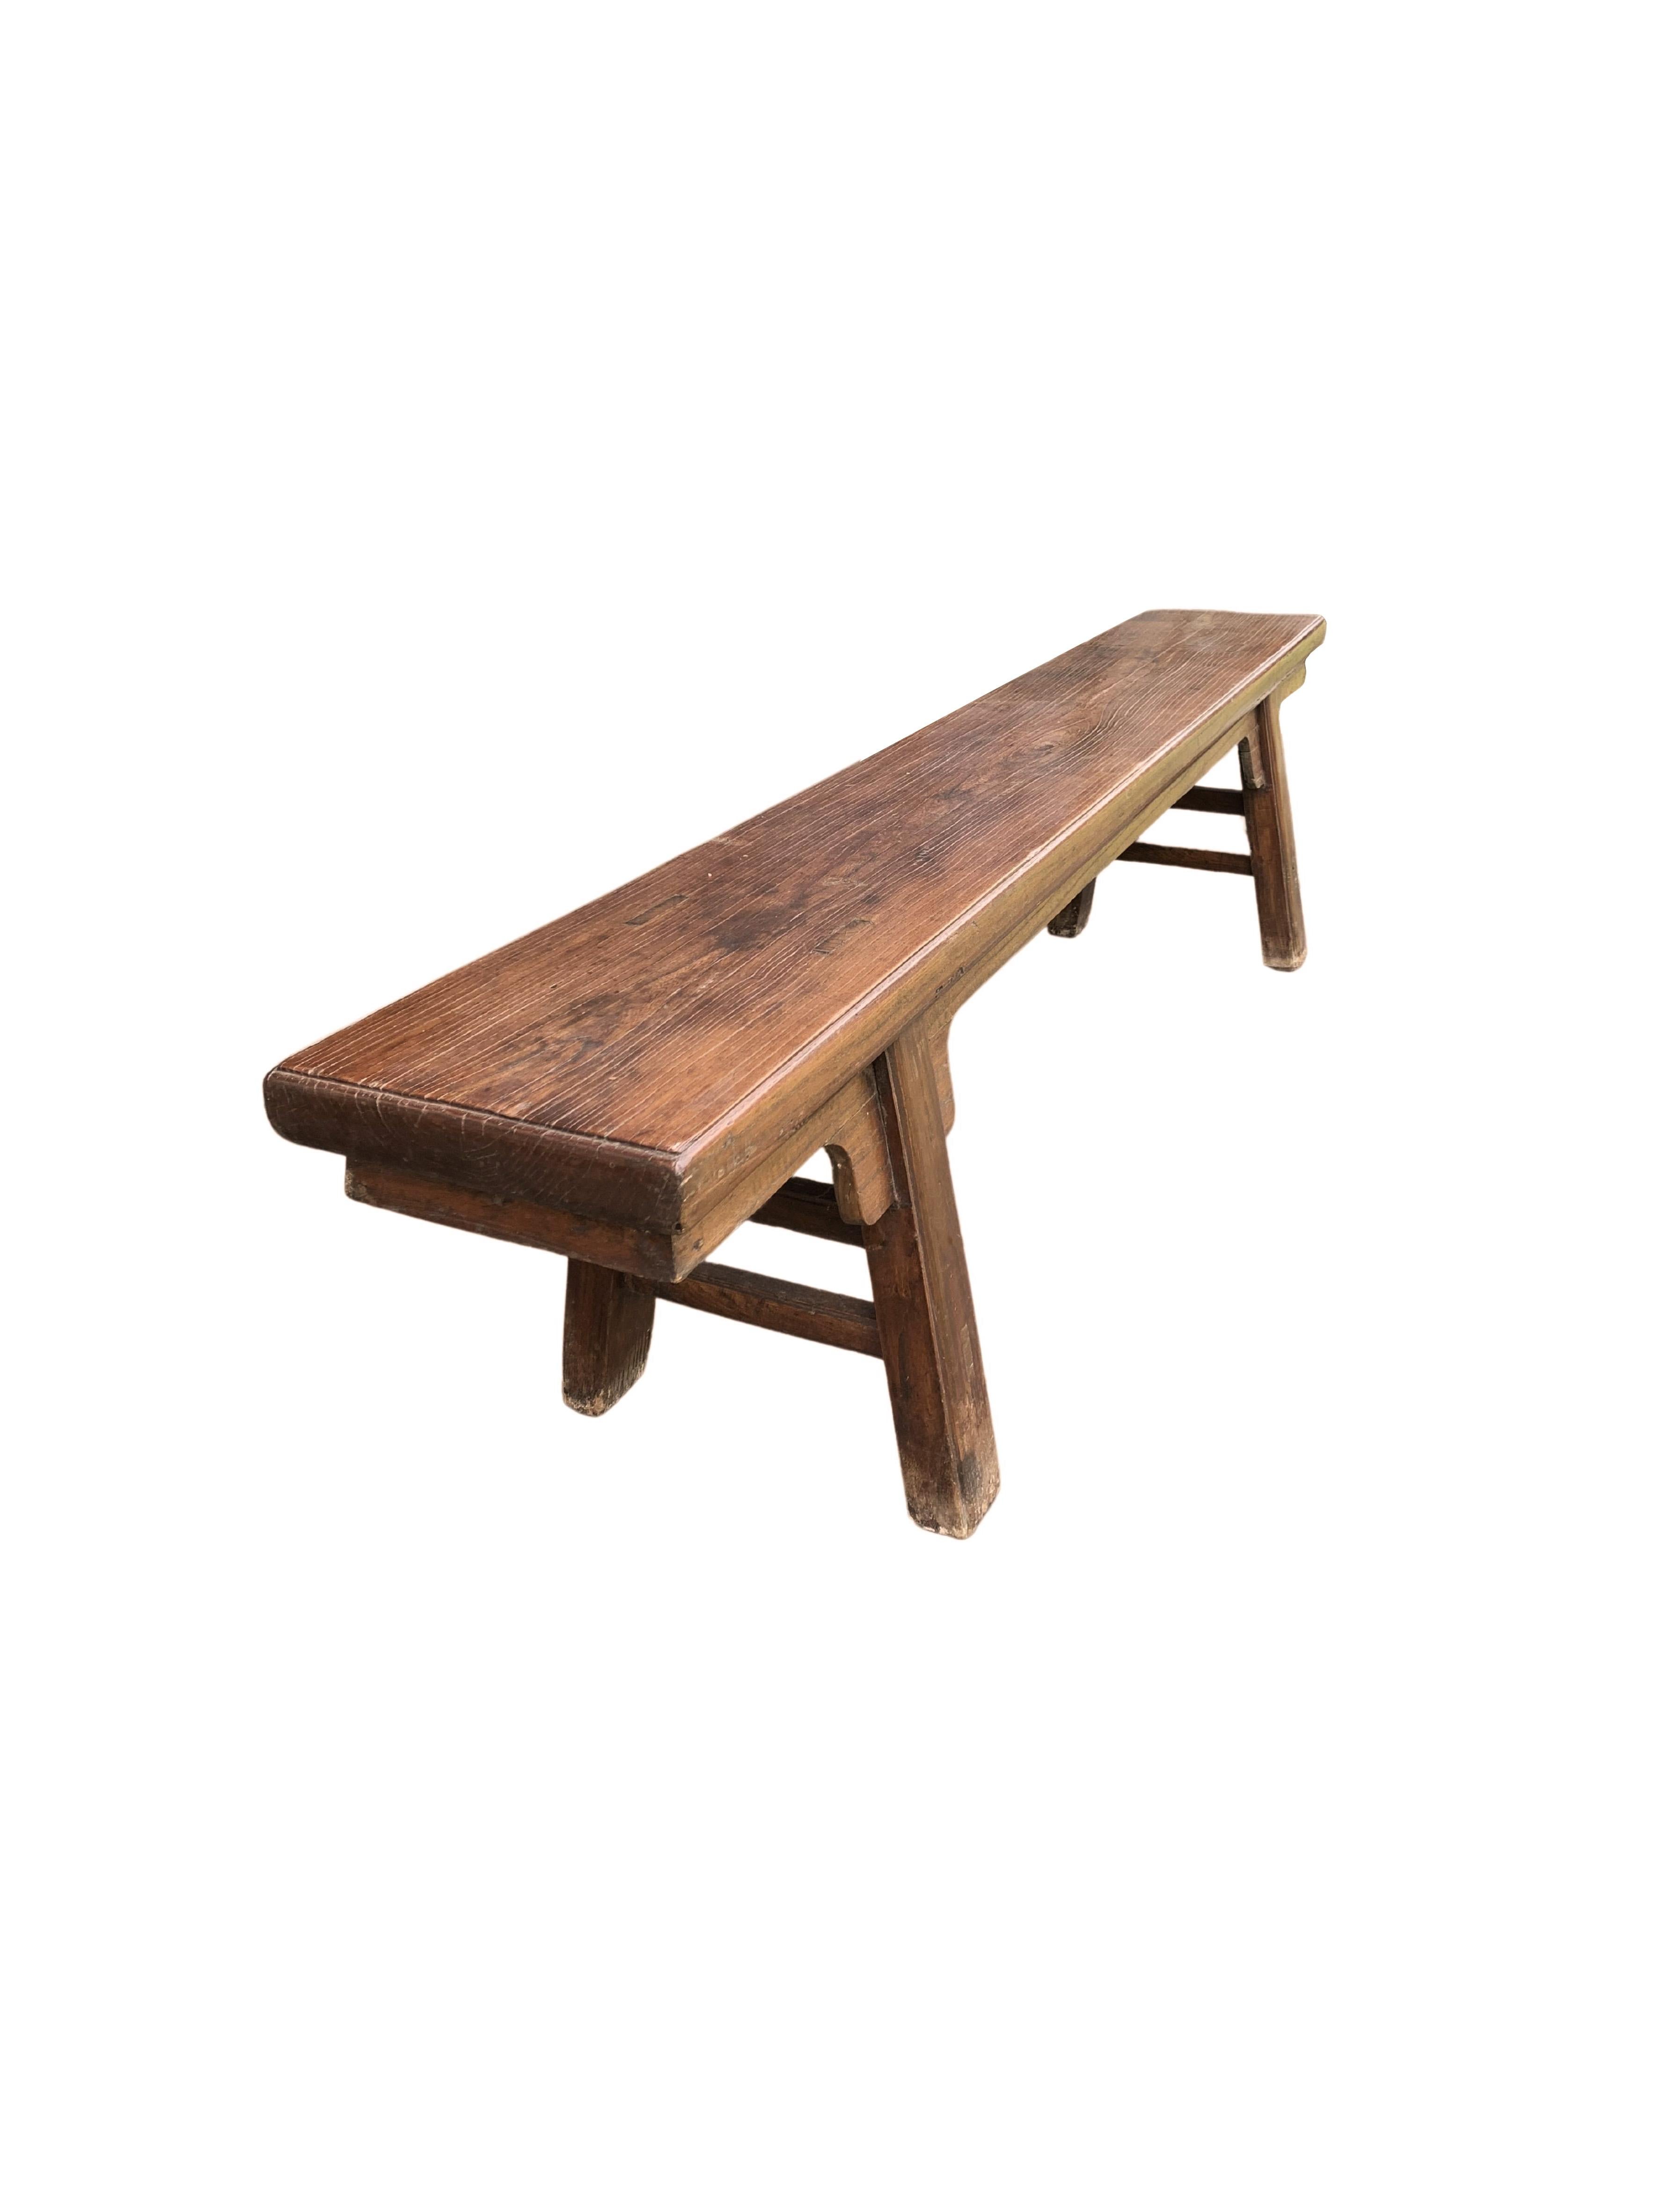 This Chinese long bench from the Qing Dynasty was crafted from elmwood & features straight legs with double stretchers and a solid top. It features a more than centuries old lacquer finish and age related patina and textures. A true testament to